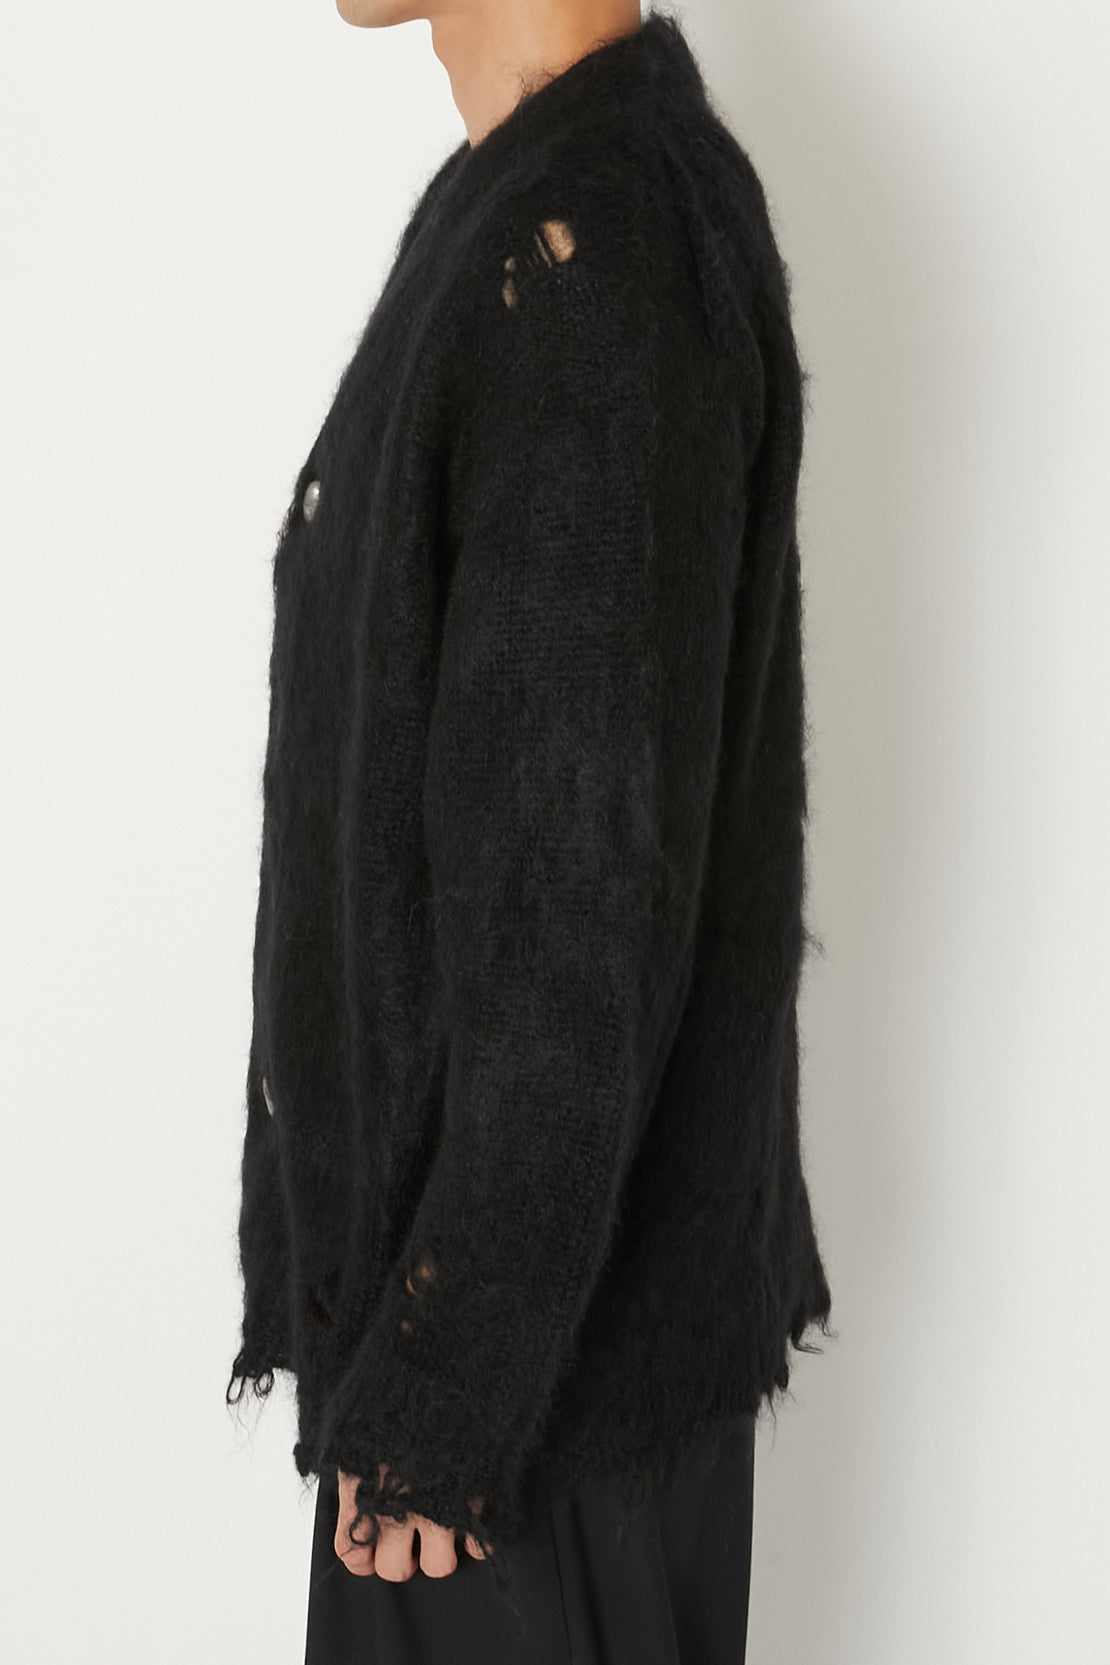 [ALMOST BLACK] OR STN BT MOHAIR CARDIGN